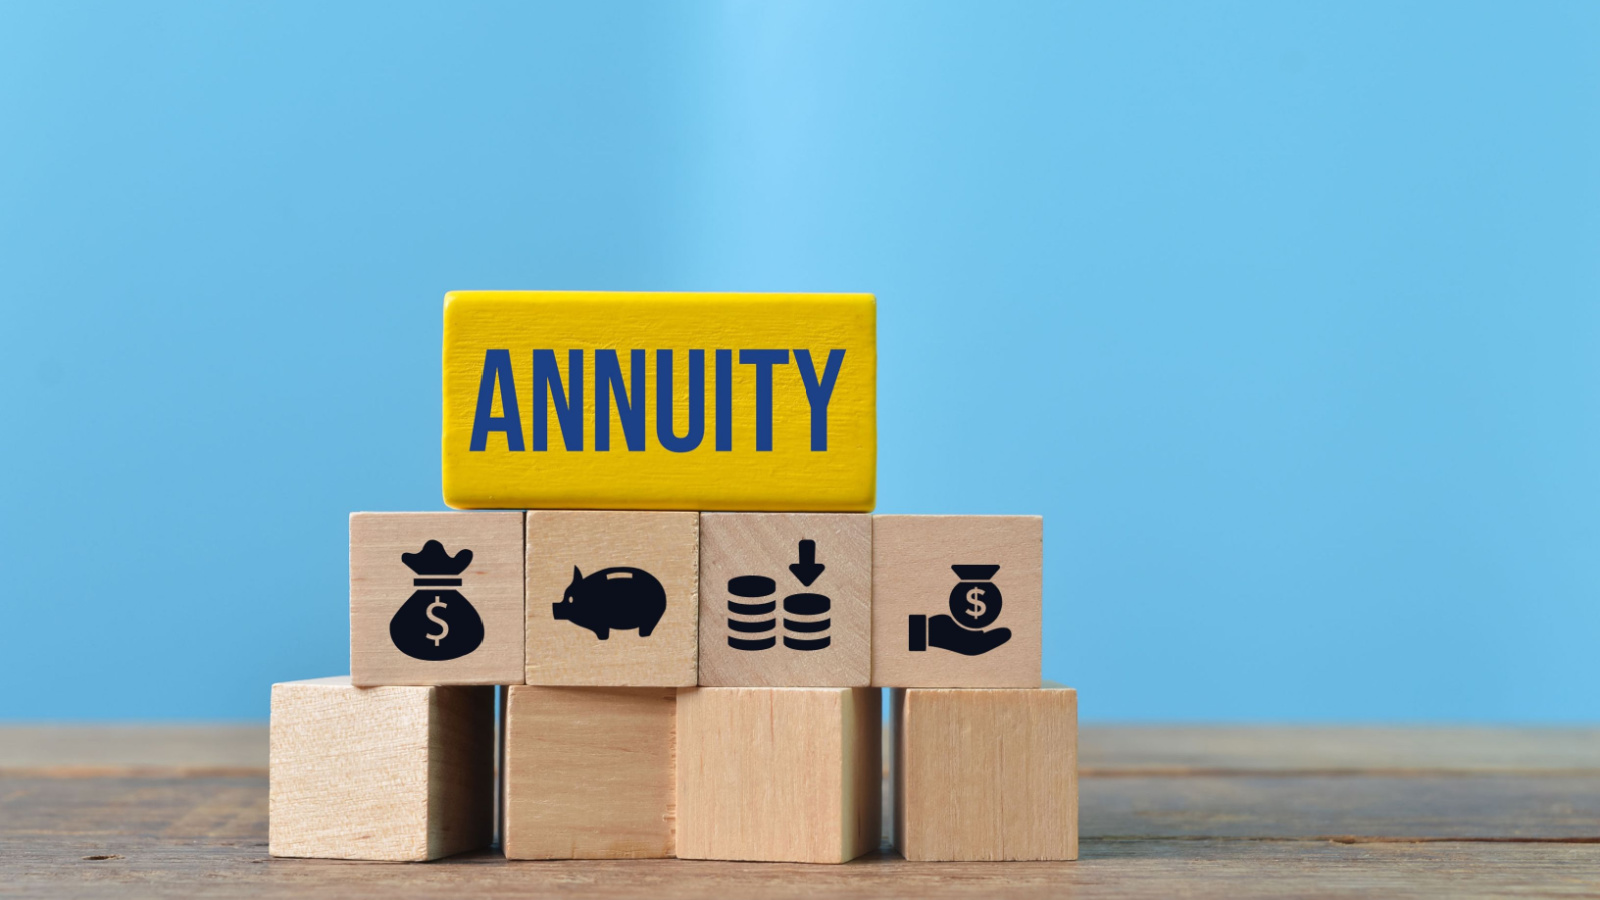 The word "annuity" displayed on a big yellow block and symbols signifying saving money on smaller blocks, including a money bag, a piggy bank, coins and a hand with a small jar of money